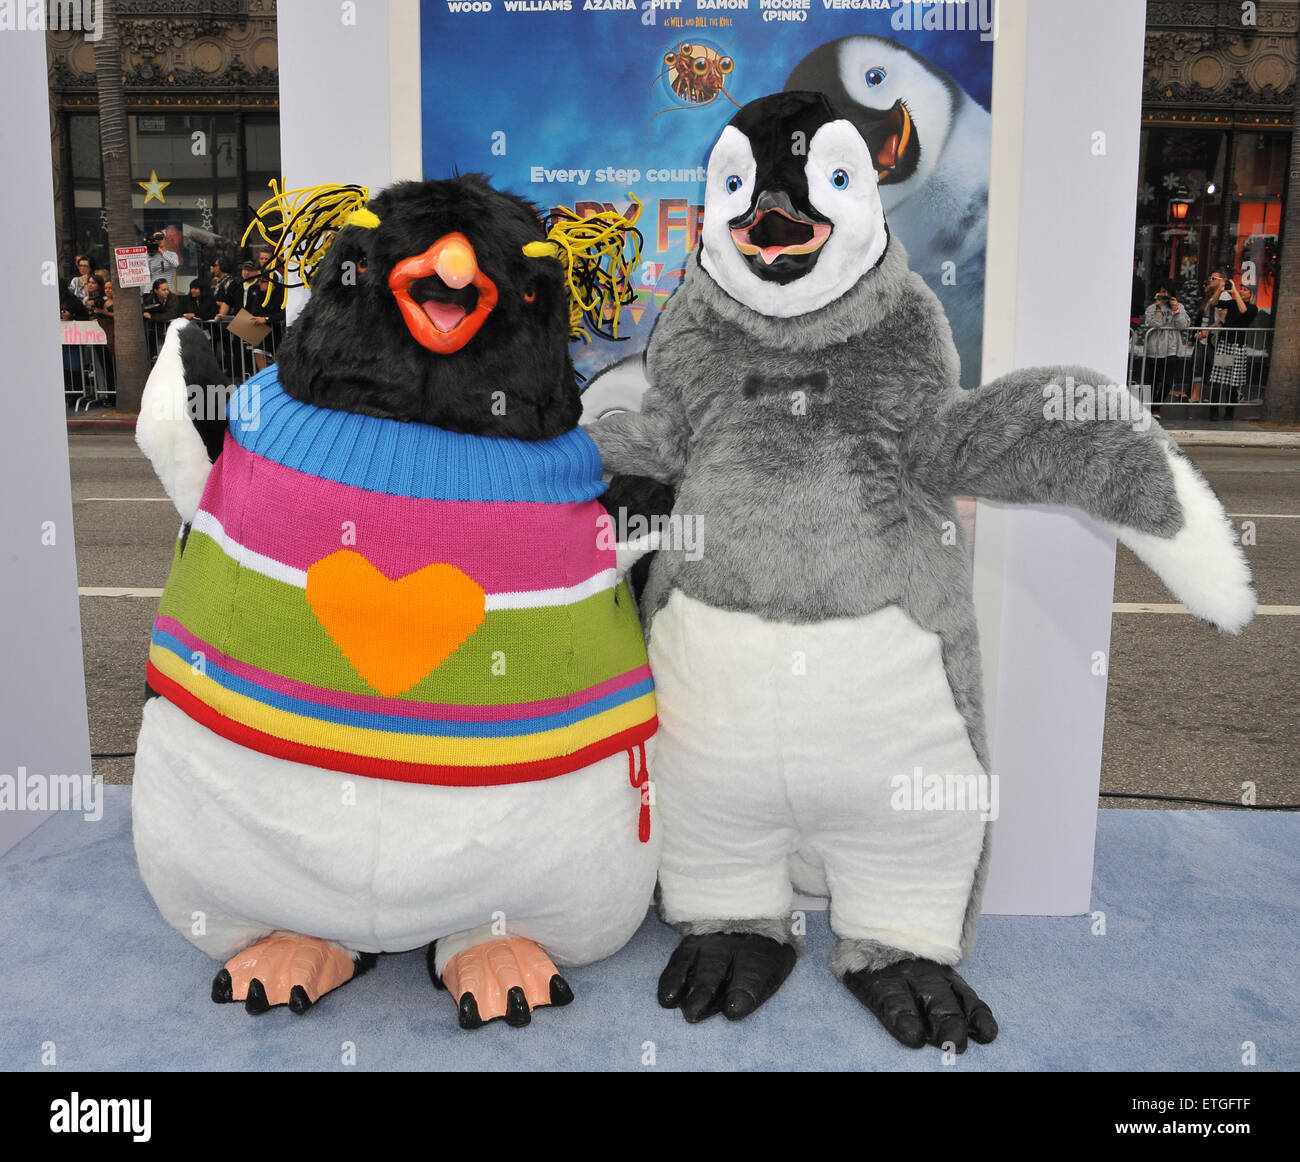 LOS ANGELES, CA - NOVEMBER 13, 2011: Characters at the world premiere of "Happy  Feet Two" at Grauman's Chinese Theatre, Hollywood. November 13, 2011 Los  Angeles, CA Stock Photo - Alamy